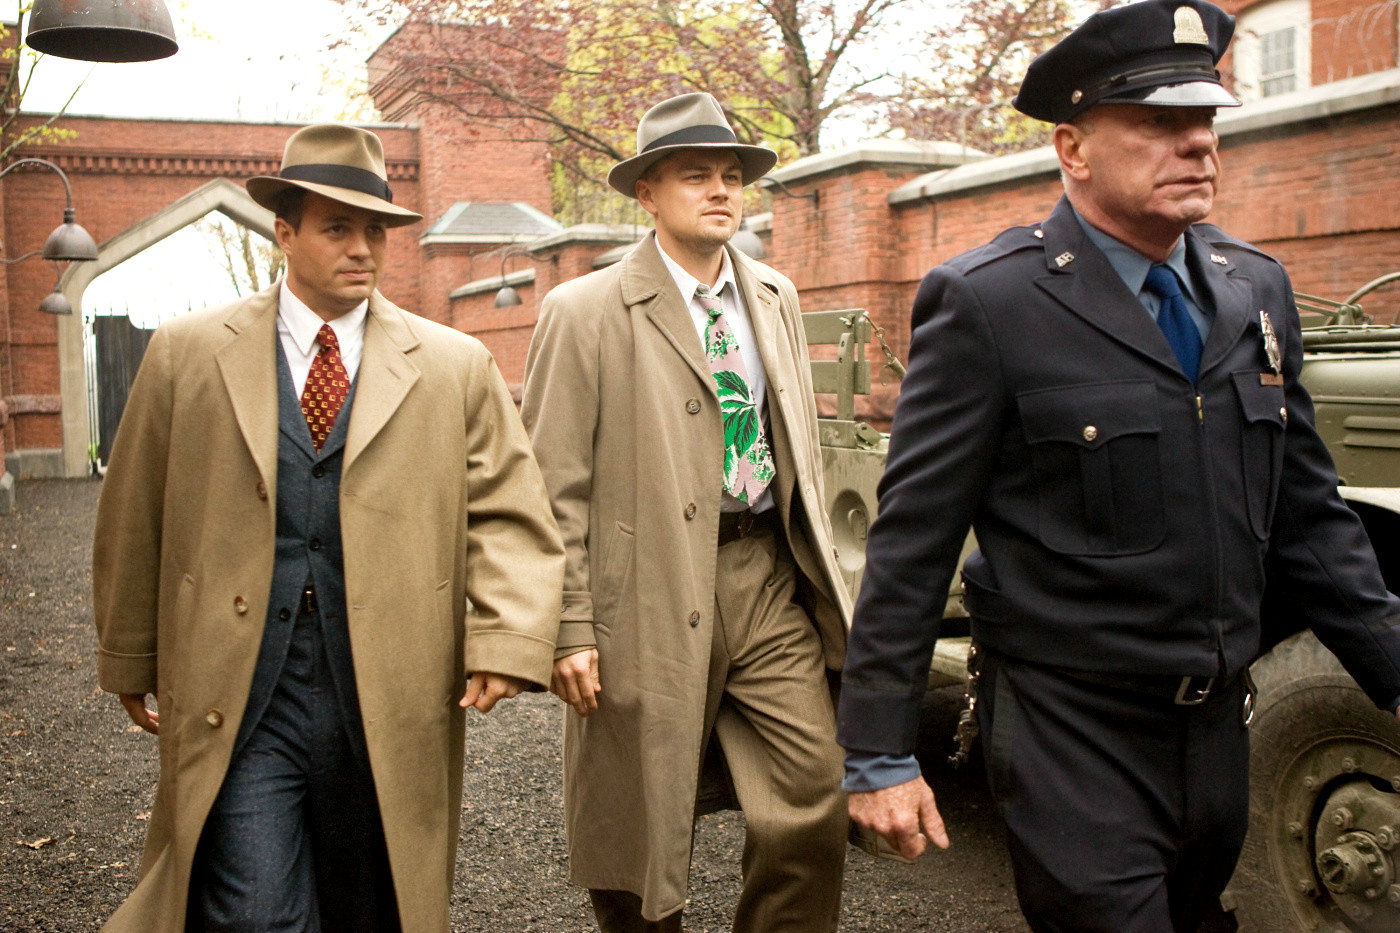 Mark Ruffalo stars as Chuck Aule and Leonardo DiCaprio stars as Teddy Daniels in Paramount Pictures' Shutter Island (2010)